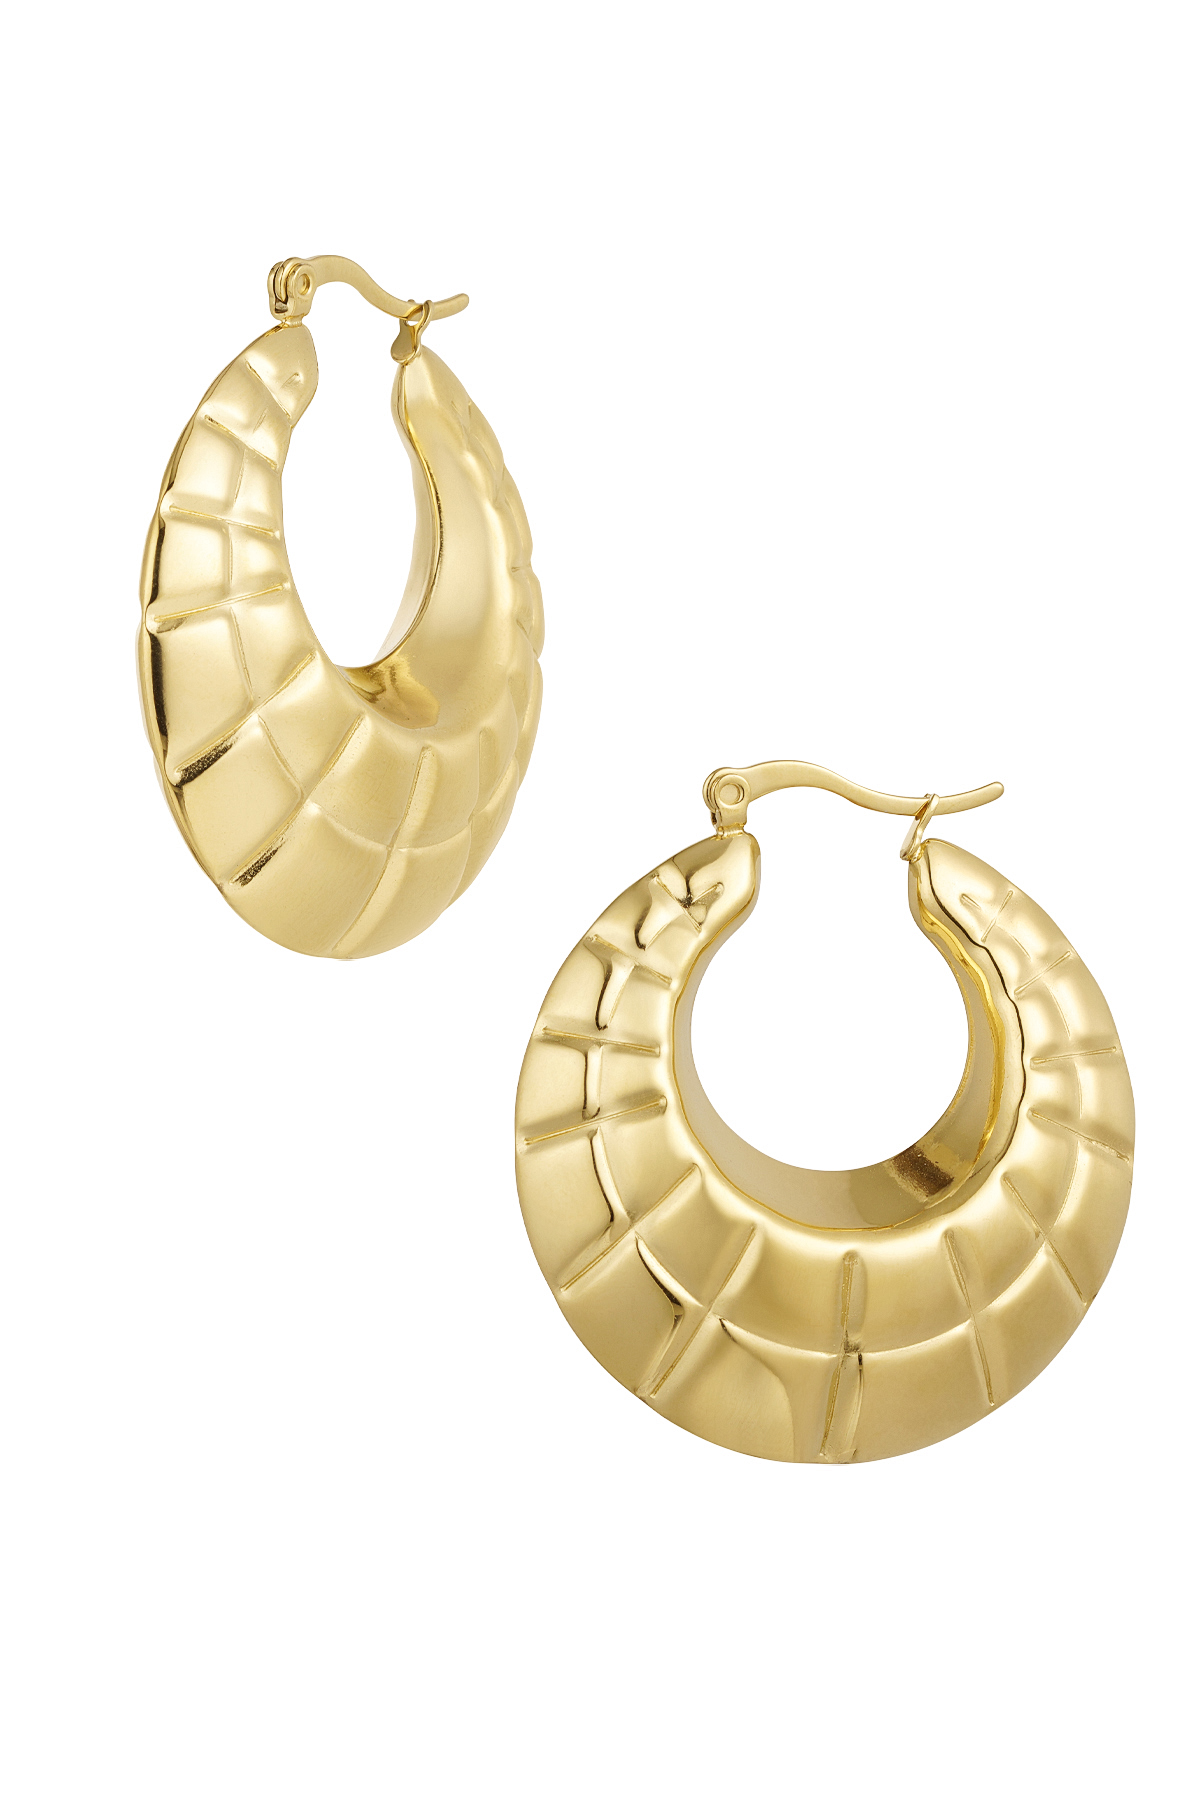 Earrings statement hoops cut out - gold